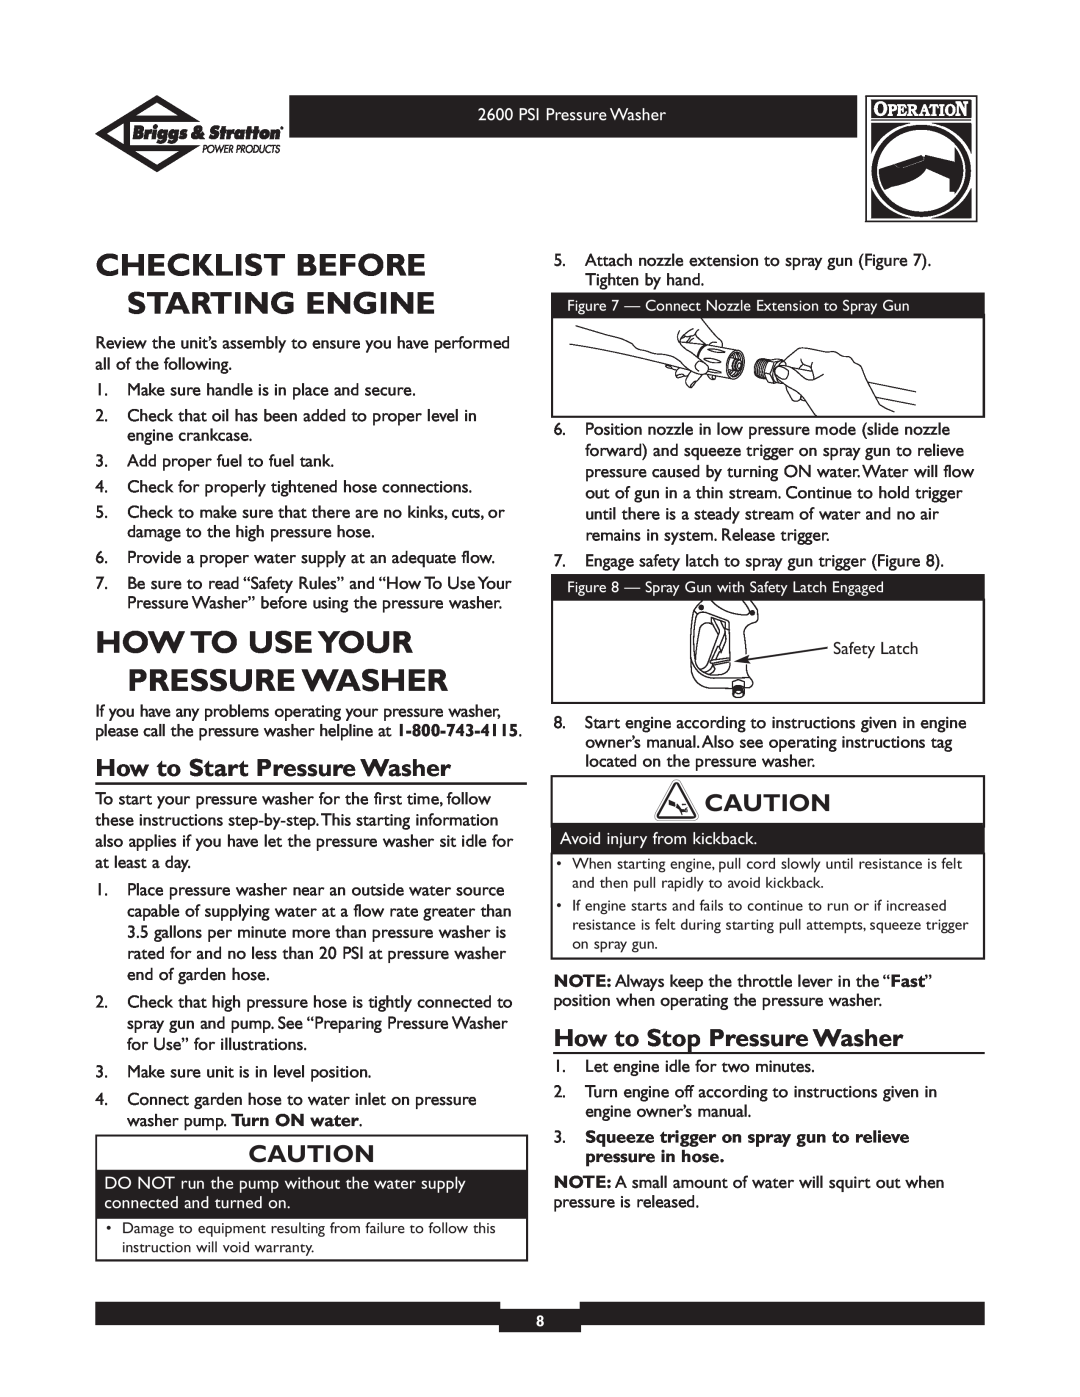 Briggs & Stratton 20216 Checklist Before, Starting Engine, How To Use Your Pressure Washer, How to Start Pressure Washer 